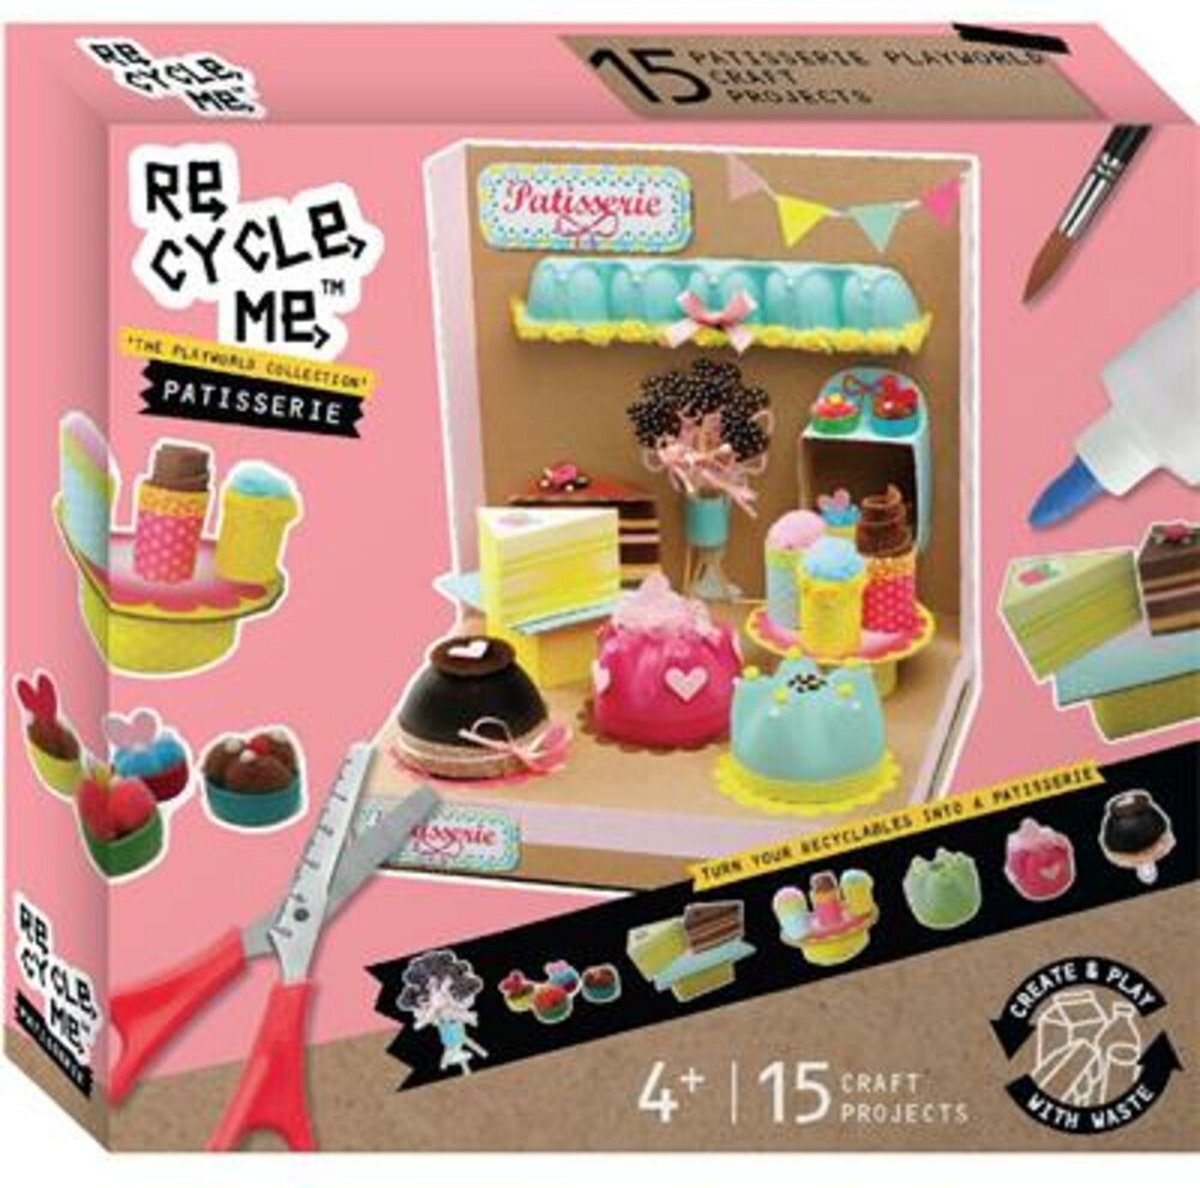 Re-Cycle-Me Re-Cycle-Me Knutselset Playworld Patisserie